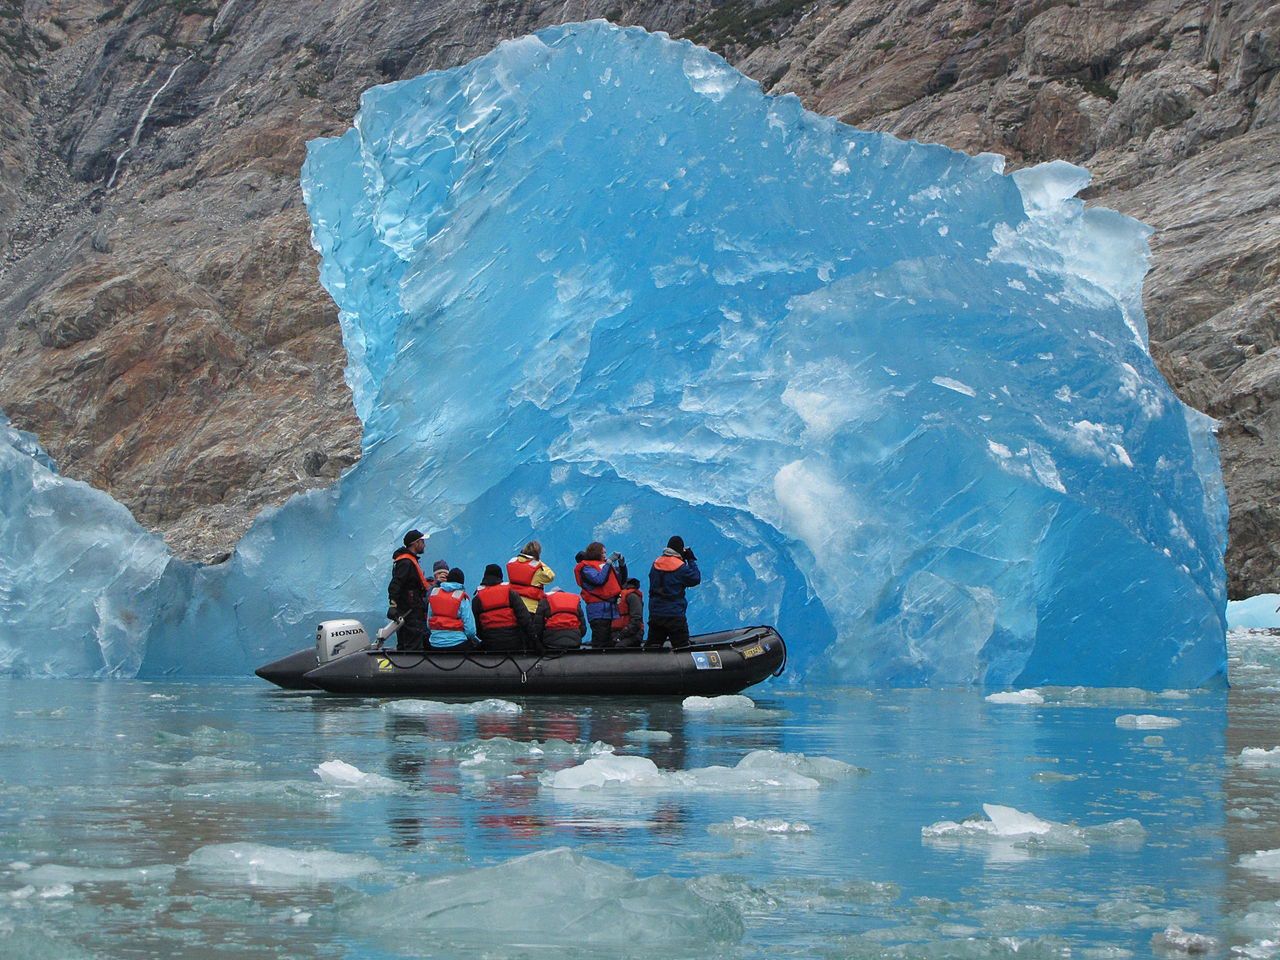 Glacial blue ice is the most valuable for palaeoclimatic research.